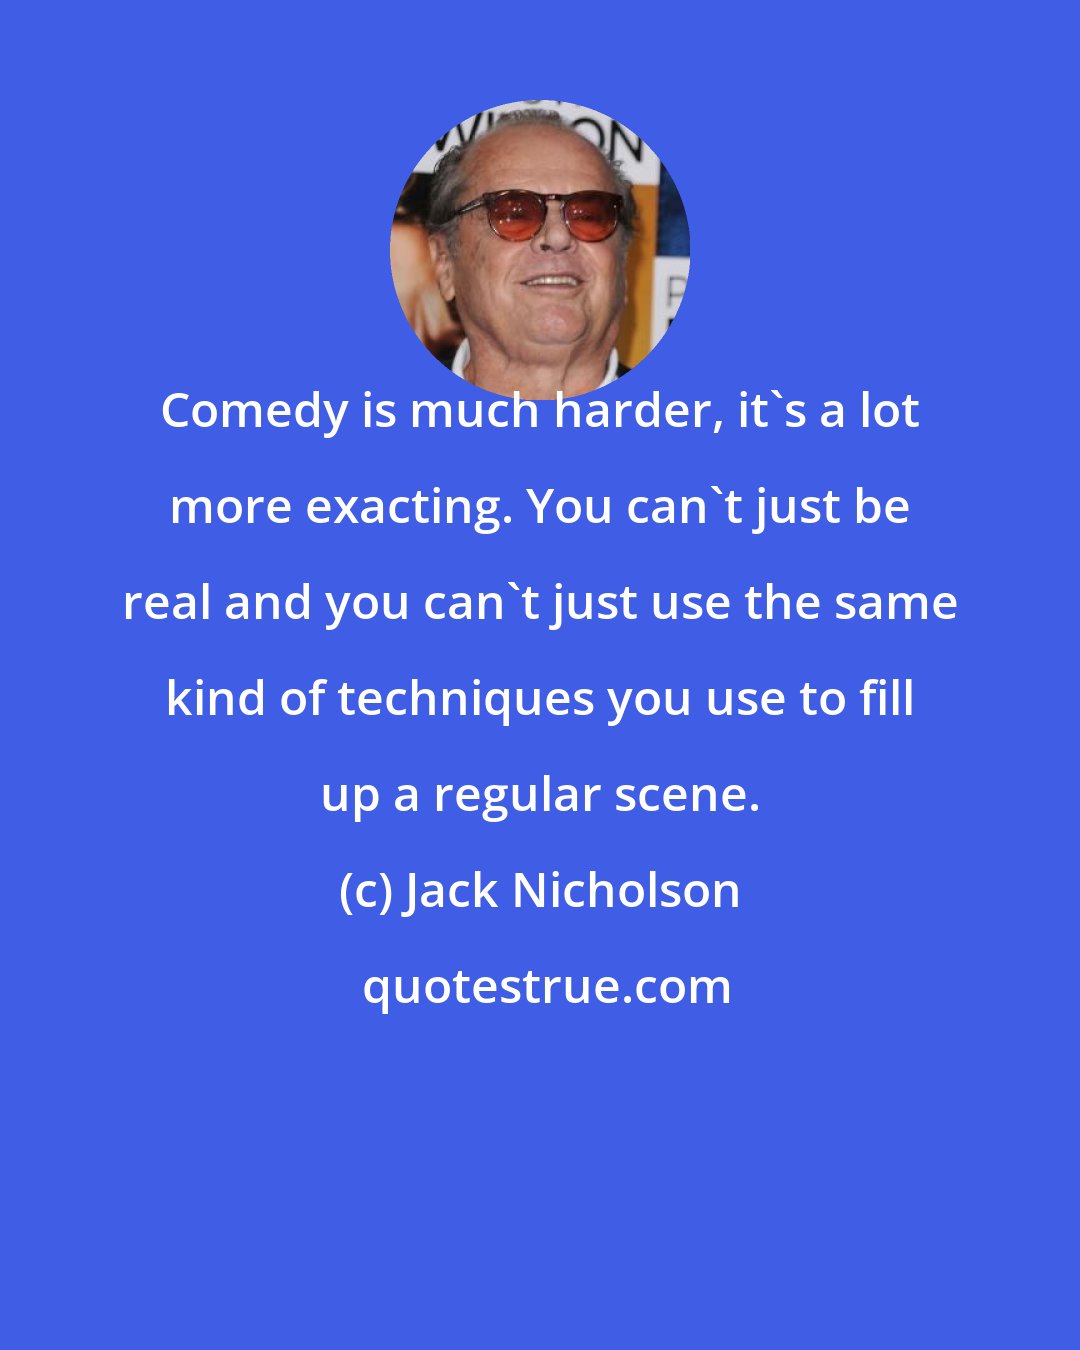 Jack Nicholson: Comedy is much harder, it's a lot more exacting. You can't just be real and you can't just use the same kind of techniques you use to fill up a regular scene.